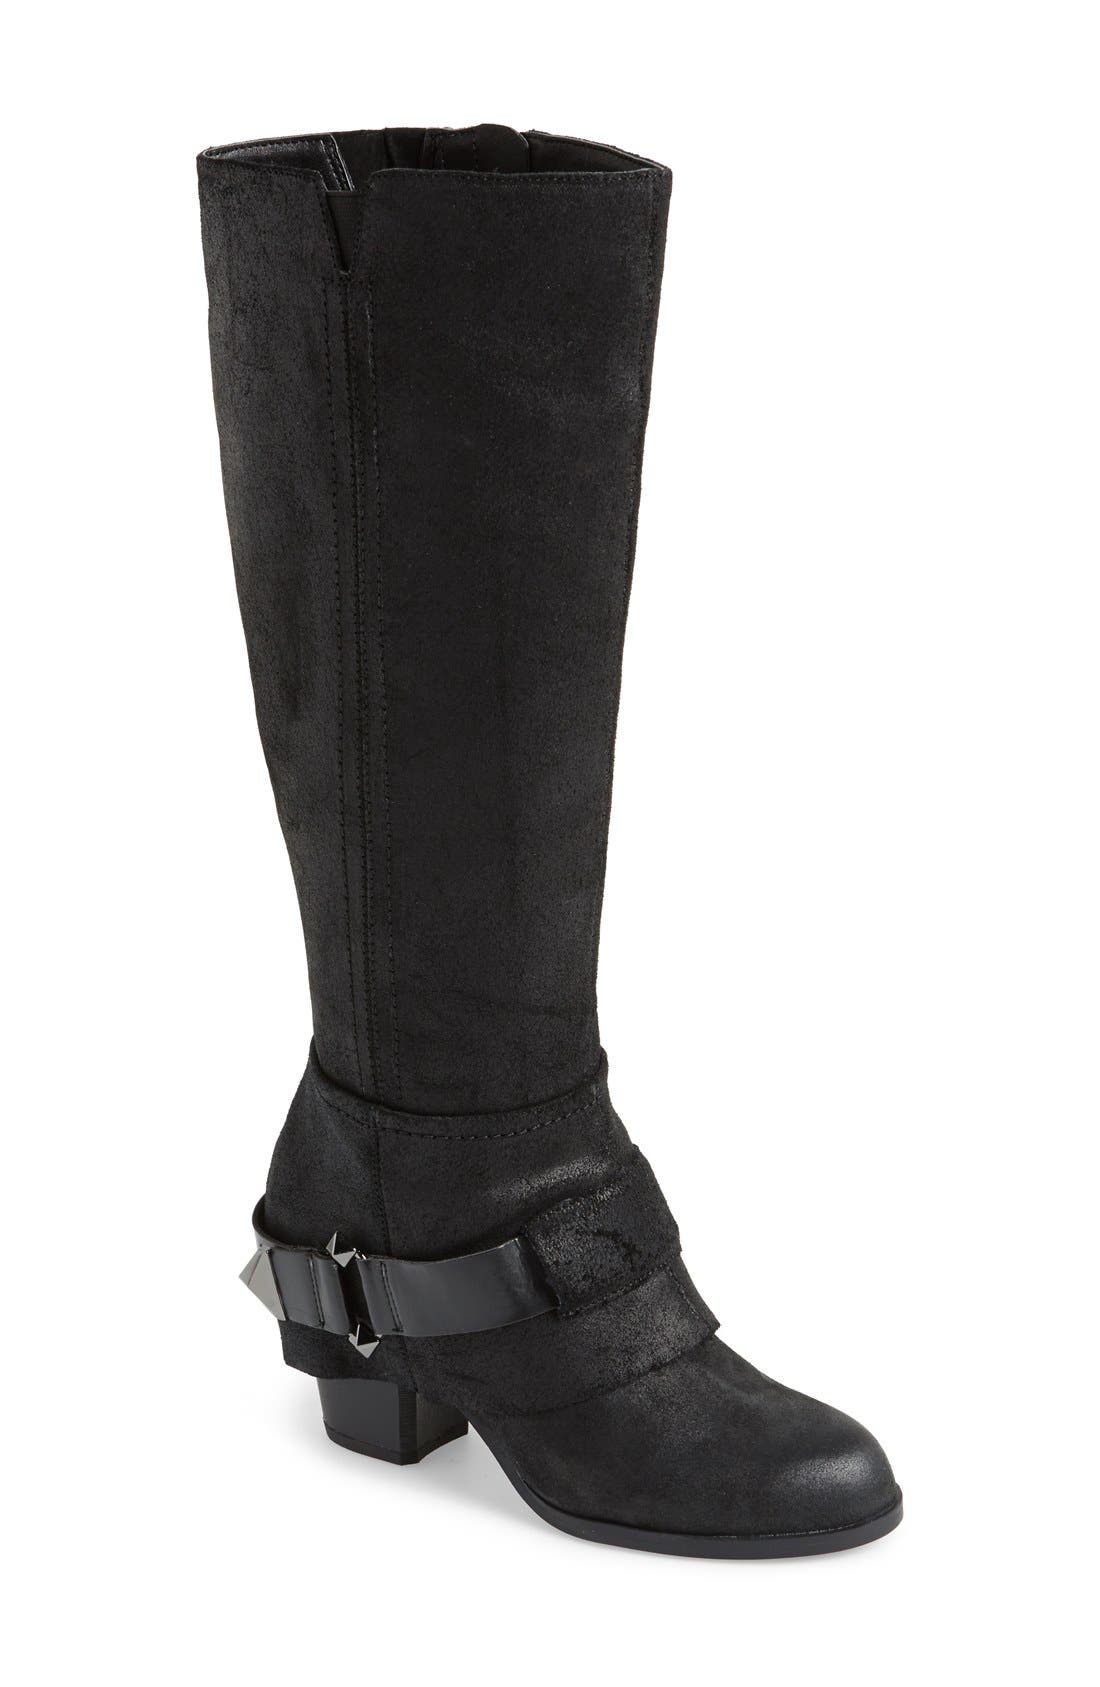 fergie knee high boots